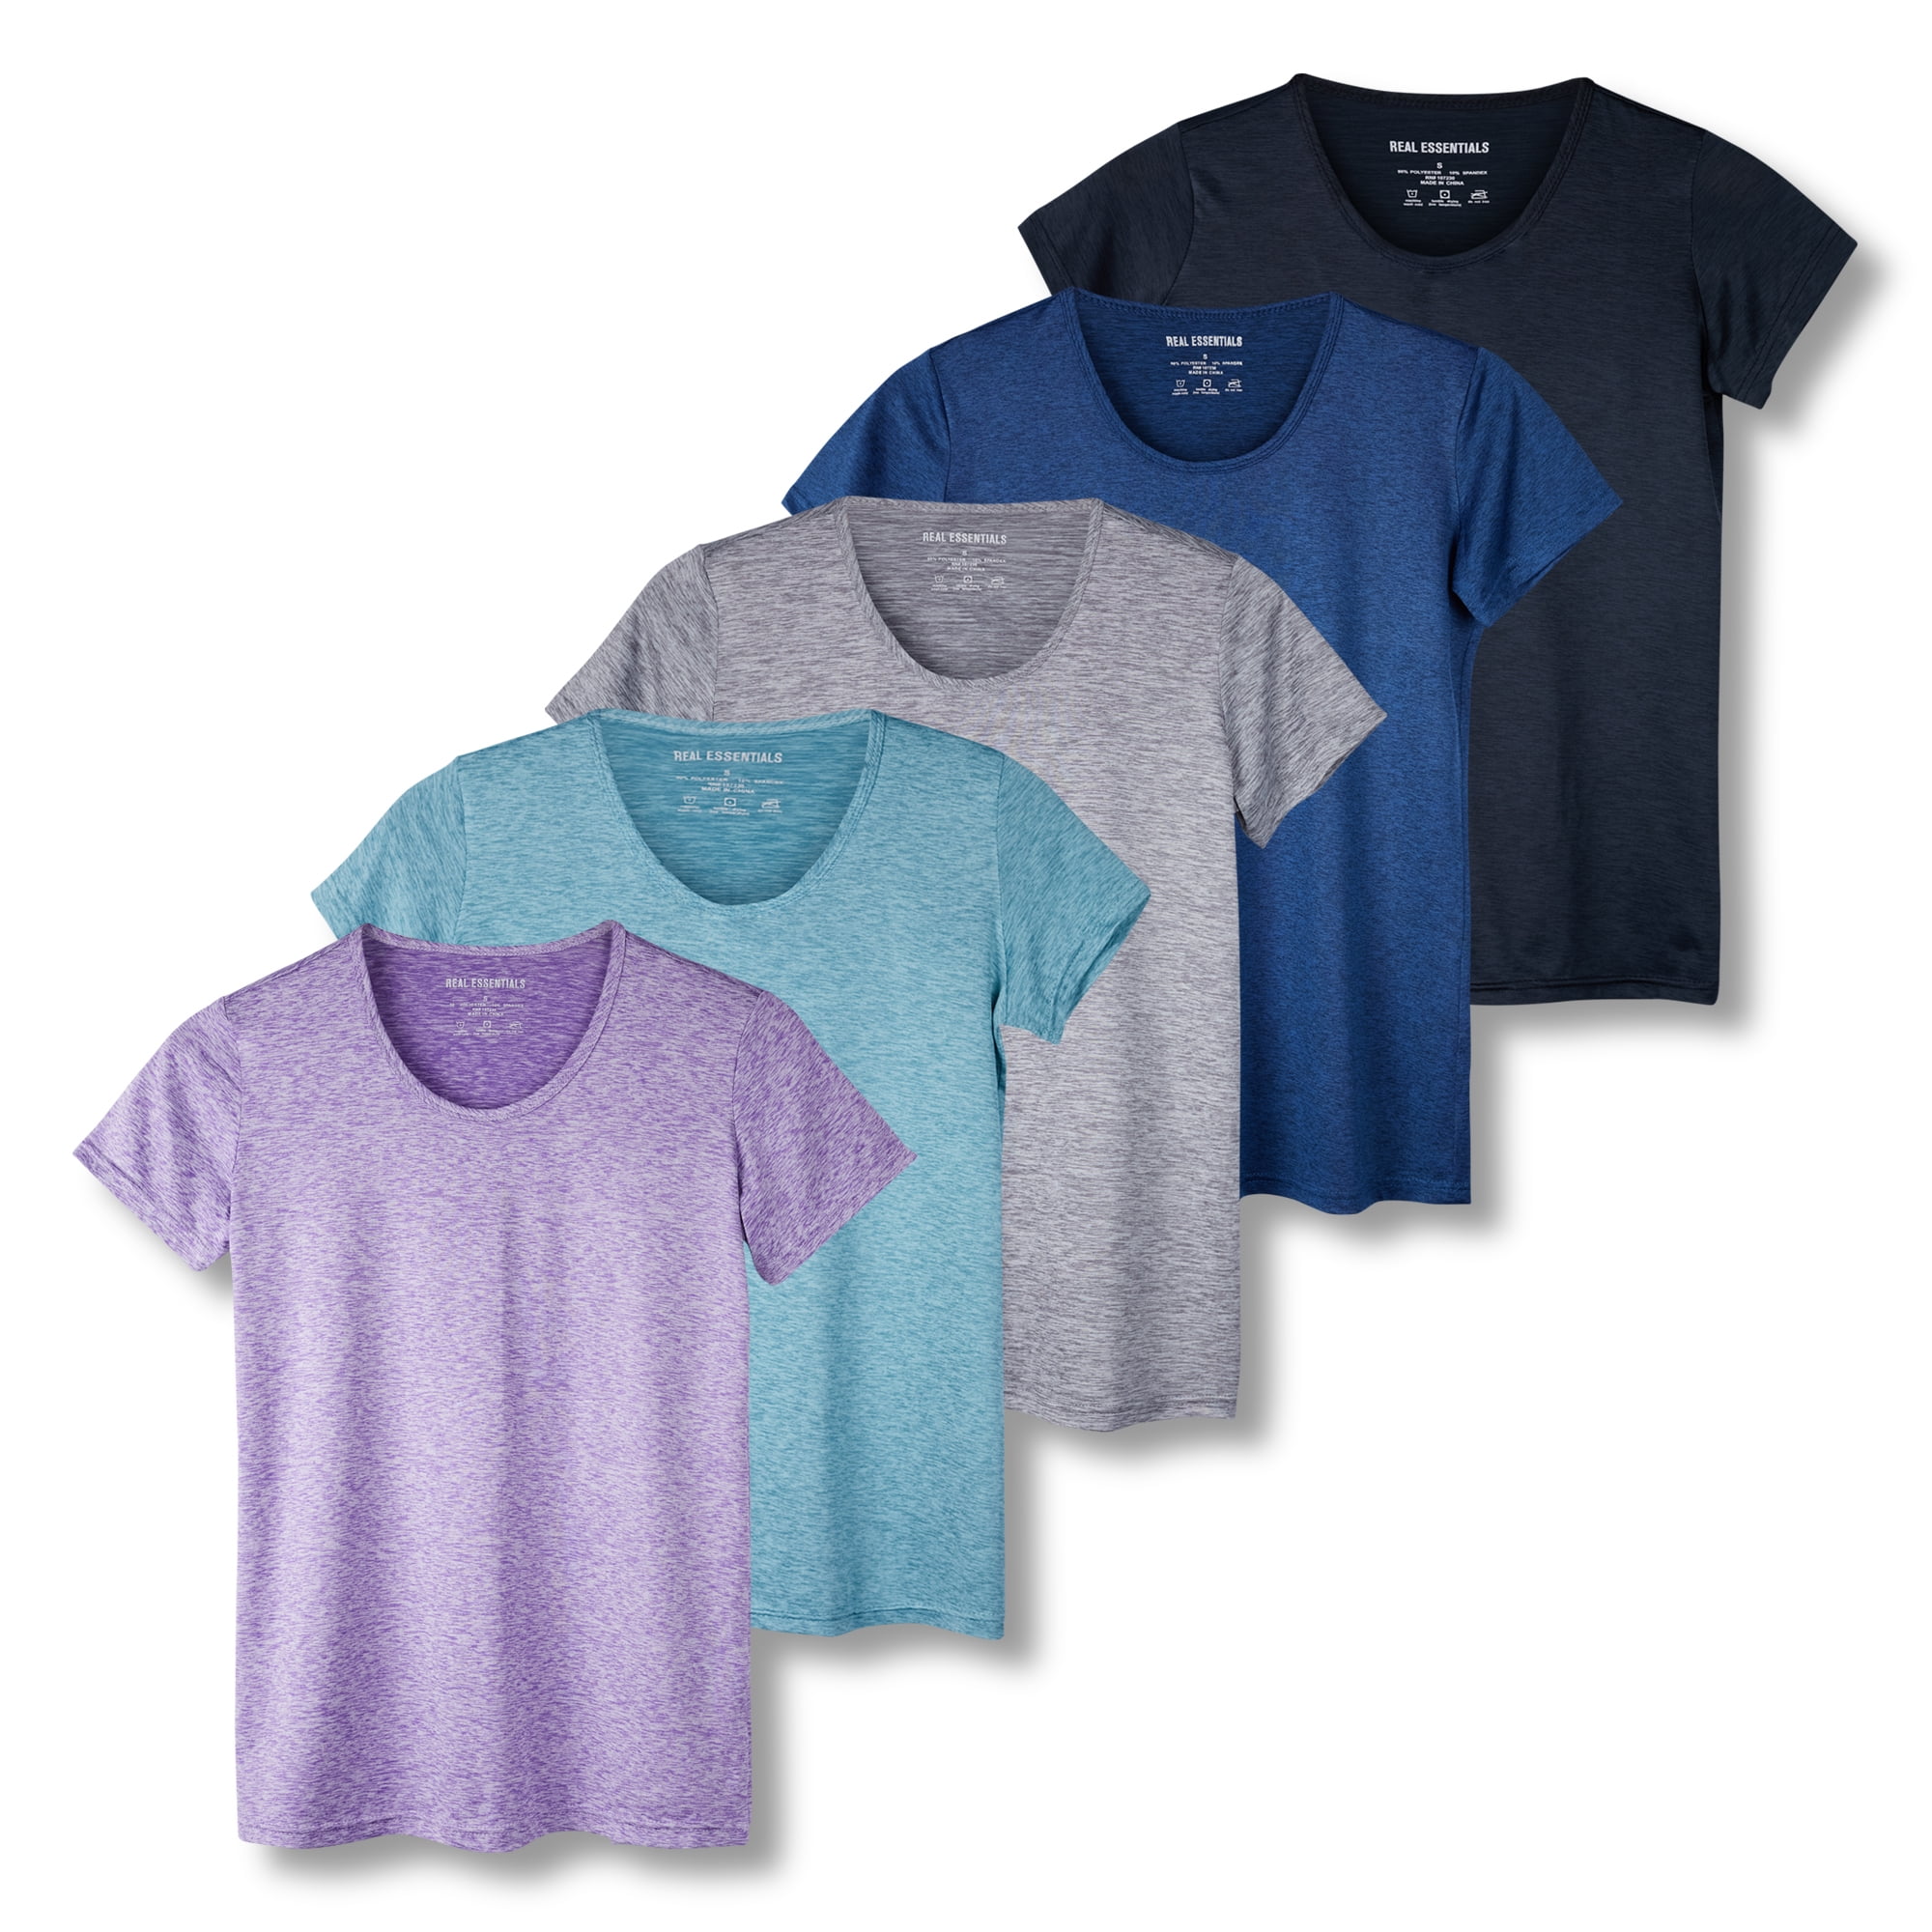 5 Pack: Women's Dry Fit Tech Stretch Short-Sleeve Crew Neck Athletic T ...